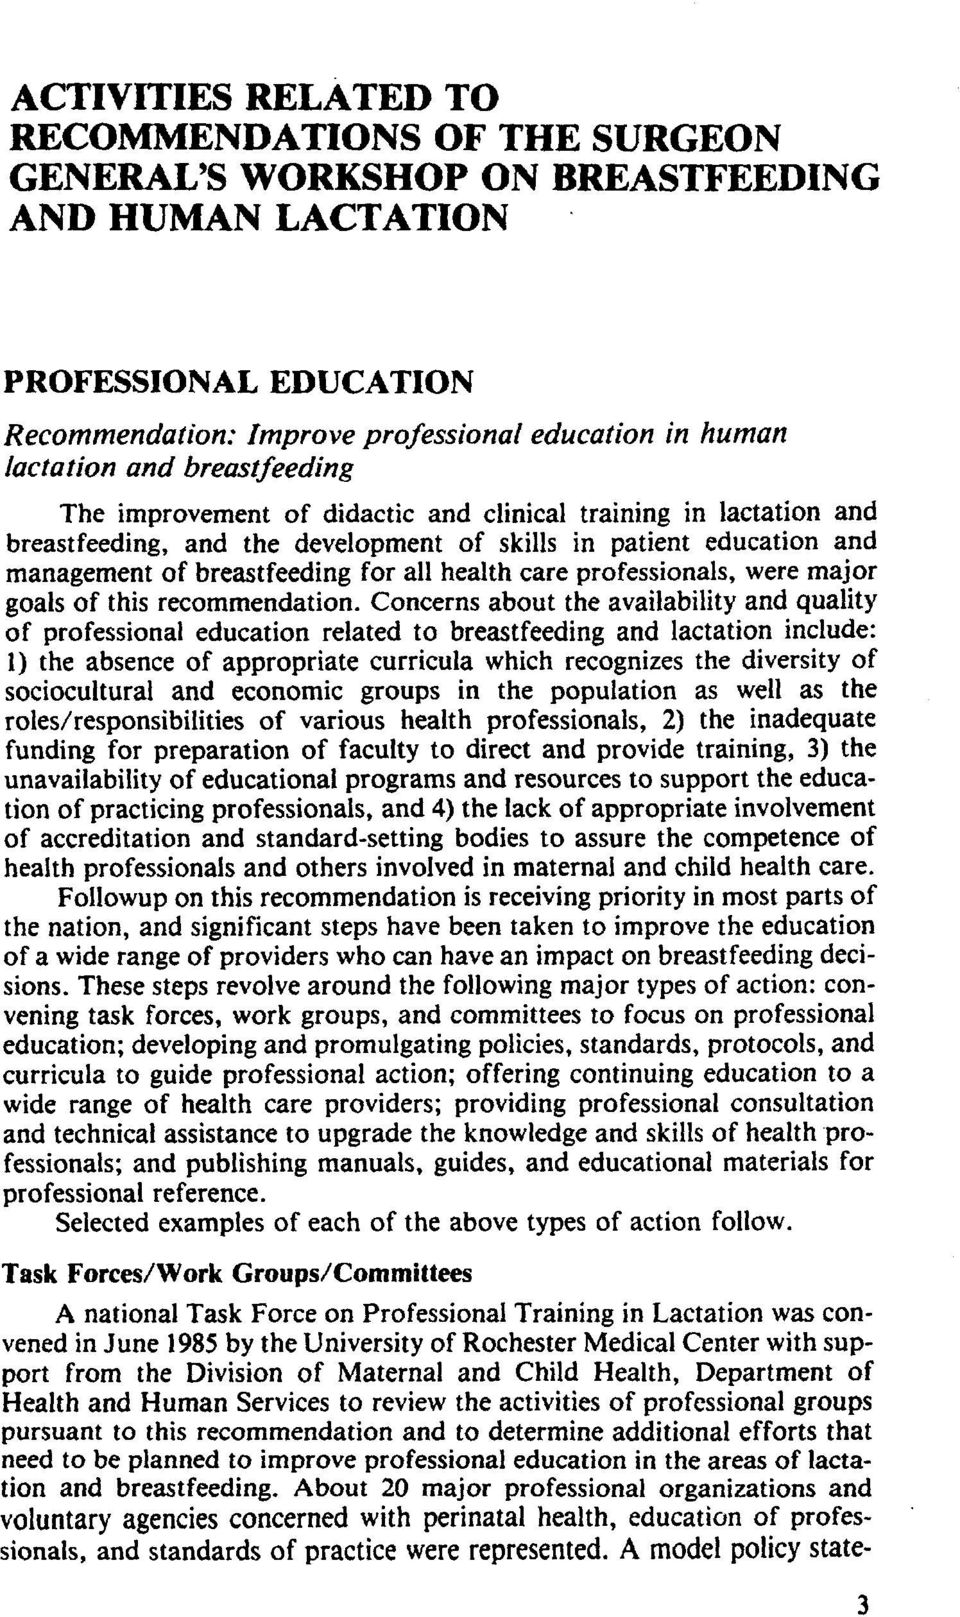 professionas, were major goas of this recommendation.